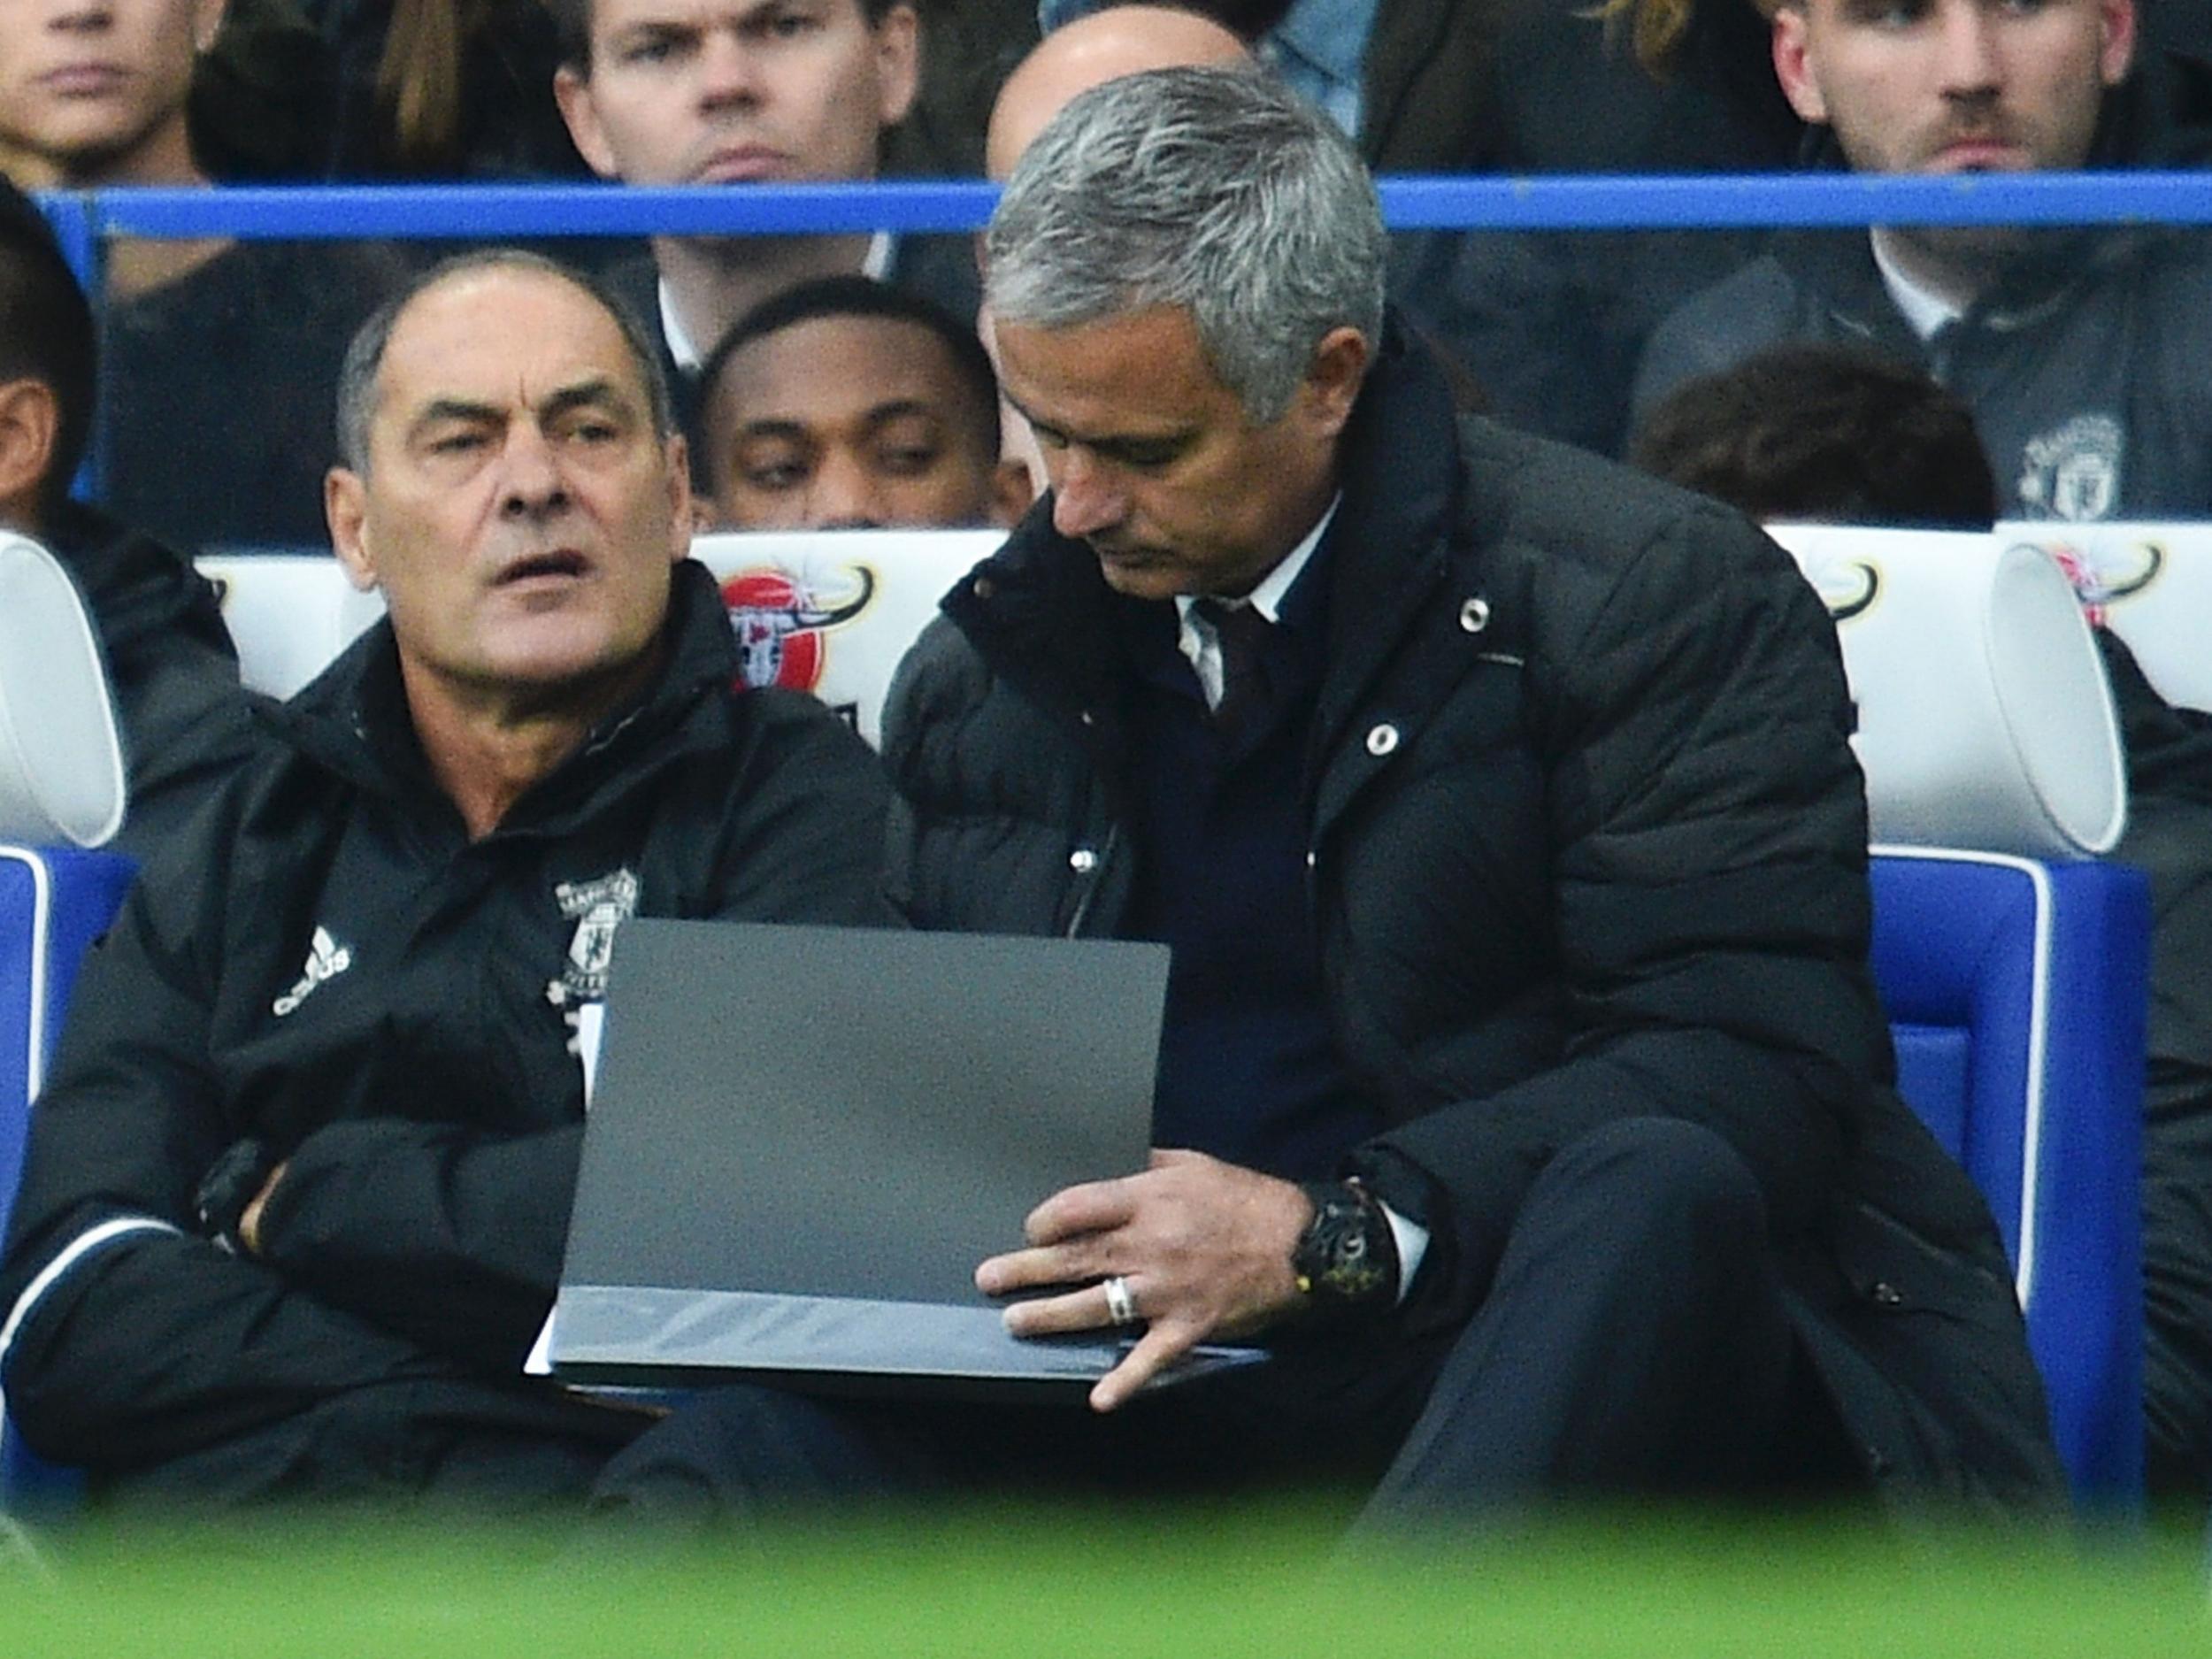 It was not a happy return to Stamford Bridge for Mourinho